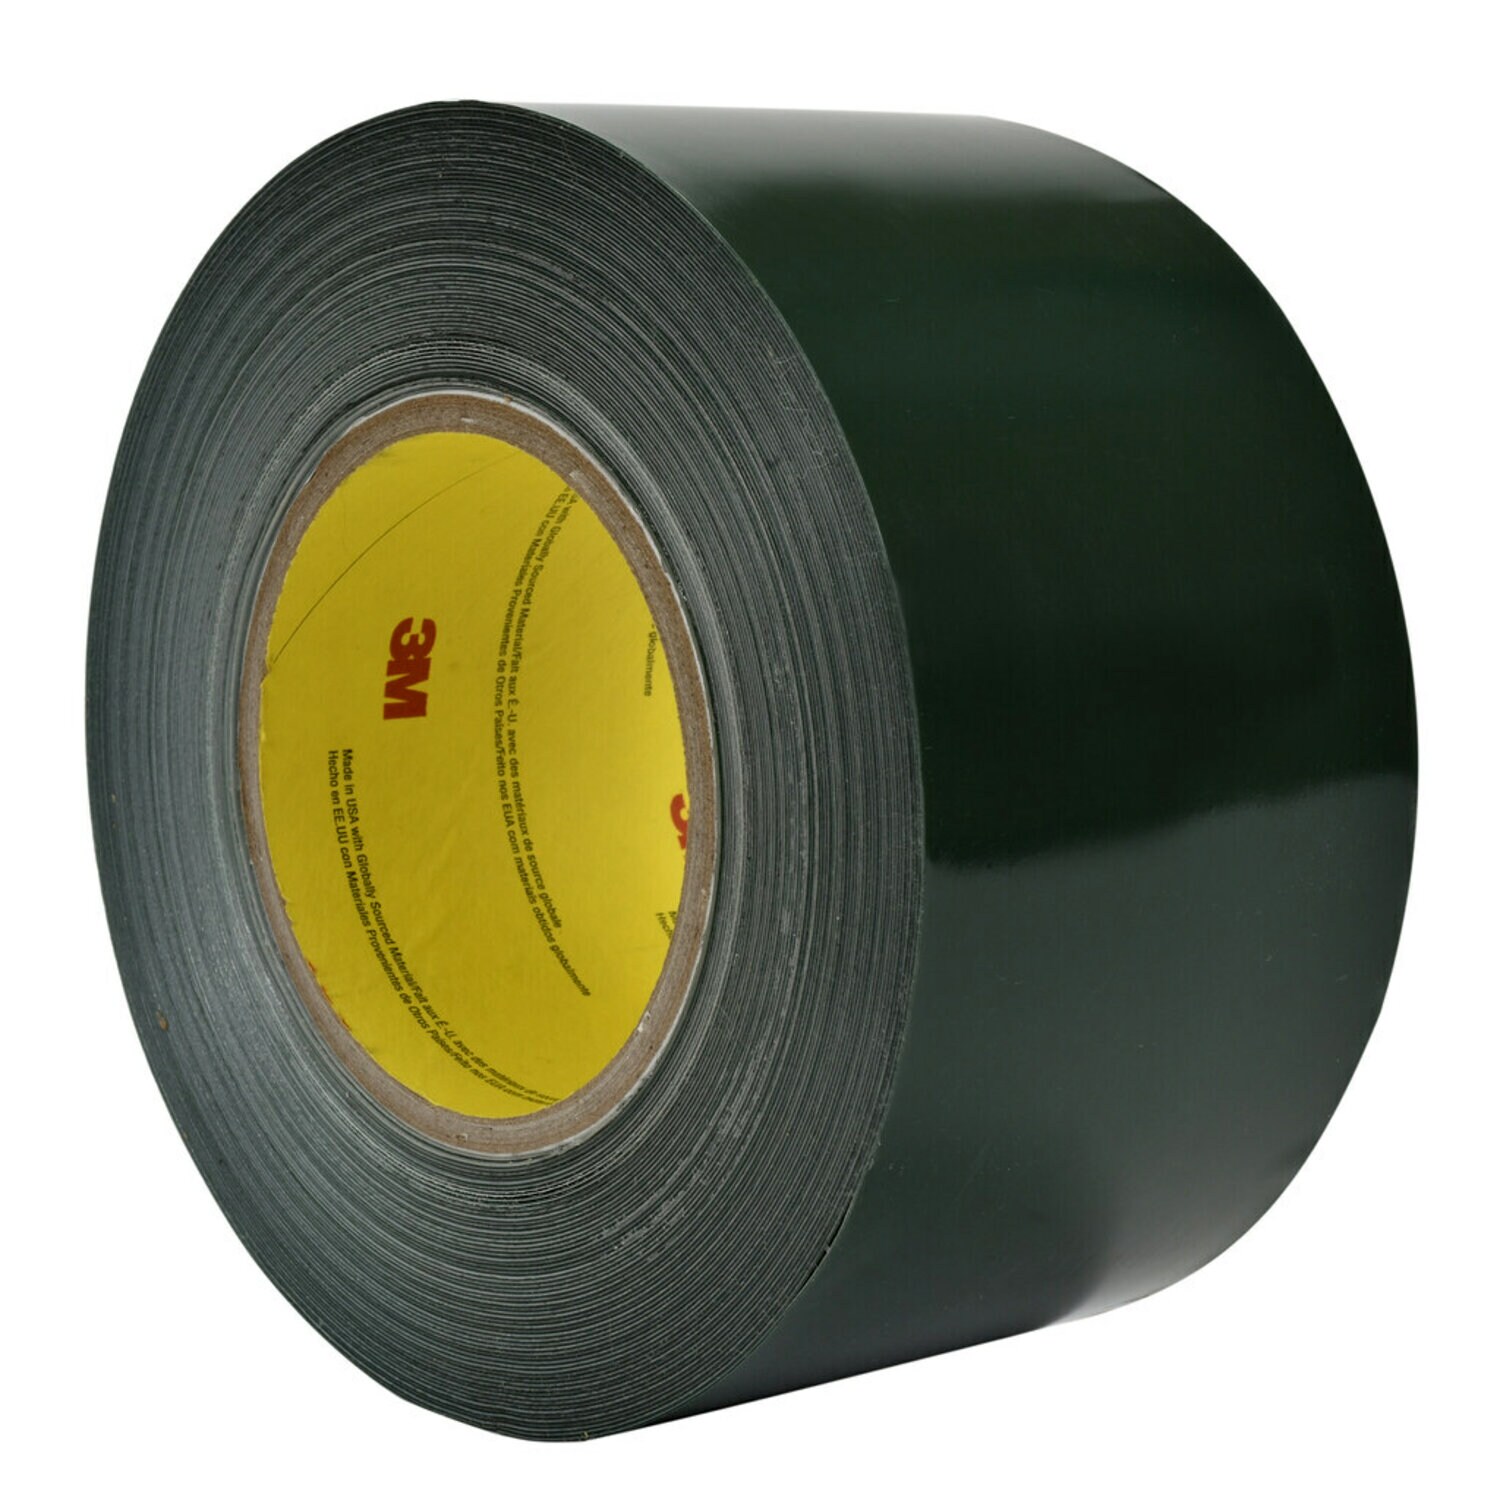 7010336120 - 3M Sealing and Holding Tape 8069, 2 in x 25 yd, 24 rolls per case,
Solid Liner